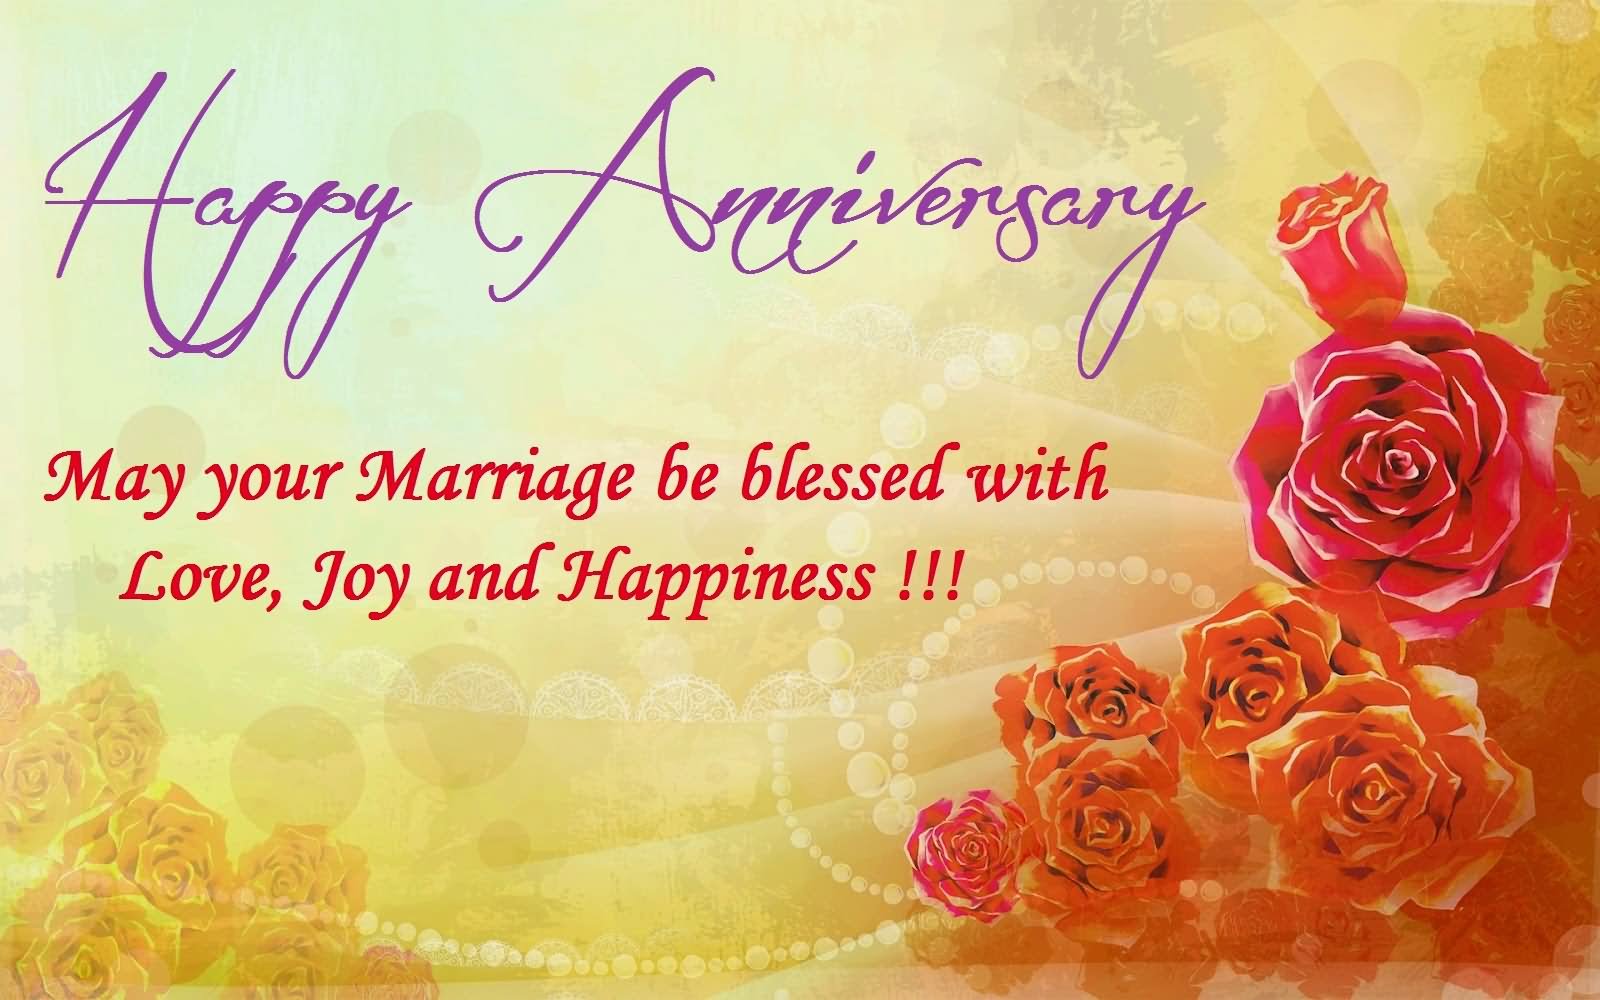 Happy Anniversary May Your Marriage Be Blessed With Love, Joy And Happiness